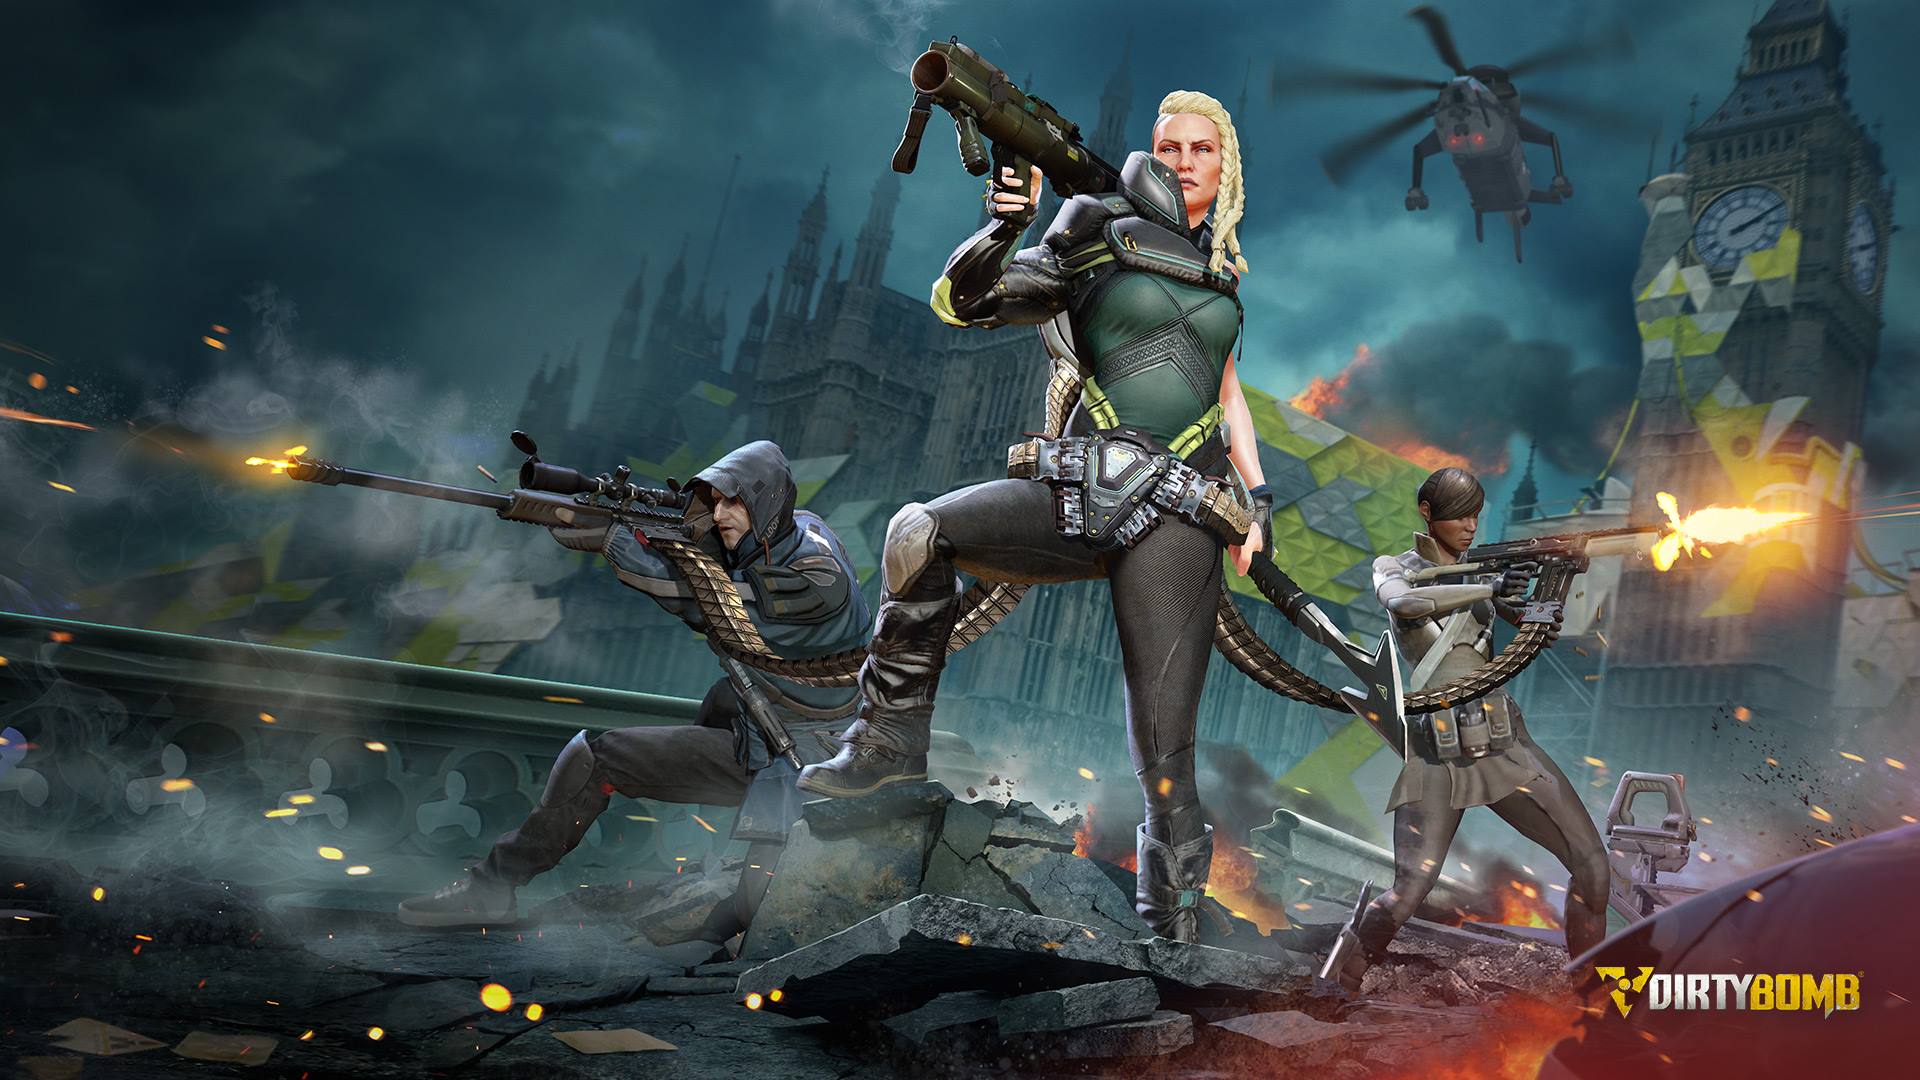 dirty bomb wallpaper,action adventure game,pc game,cg artwork,games,strategy video game